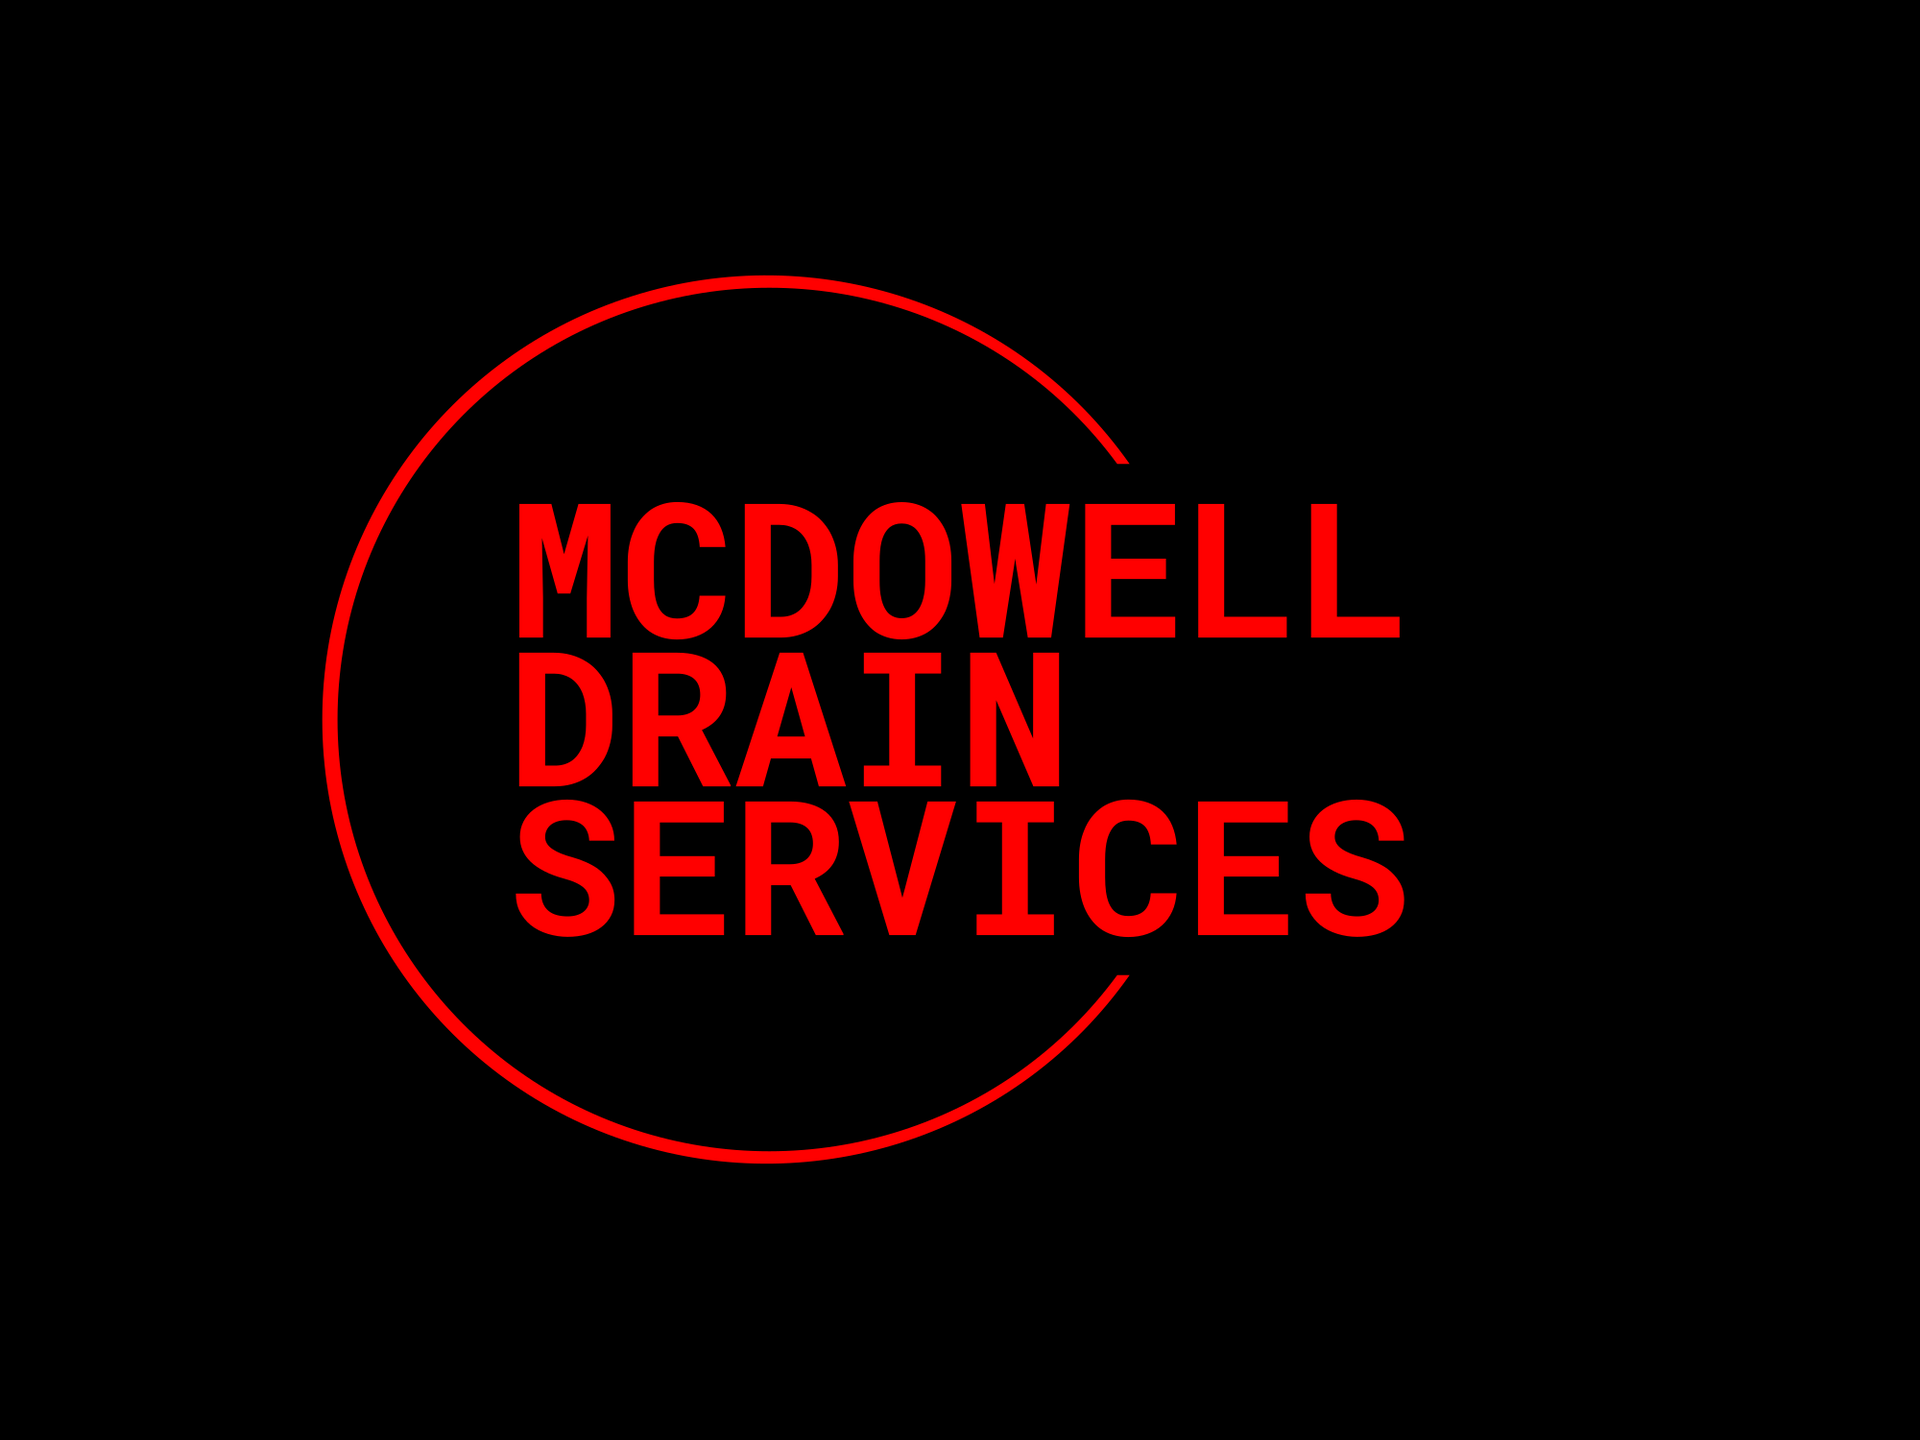 McDowell Drain Services Business Logo